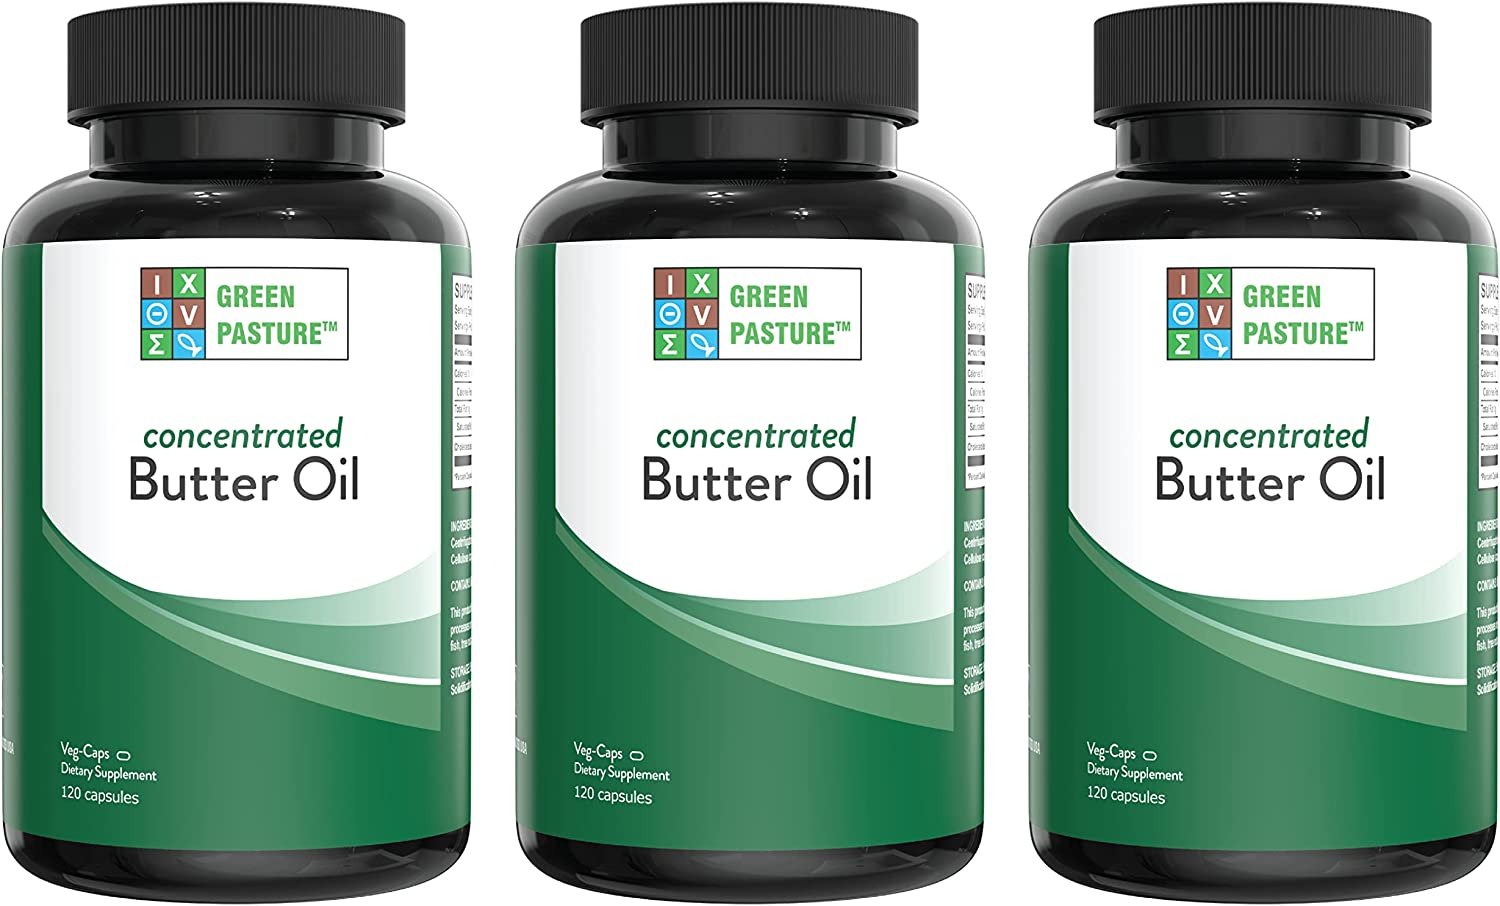 Green Pasture X-Factor Gold High Vitamin Butter Oil 120 Caps (3 Pack)